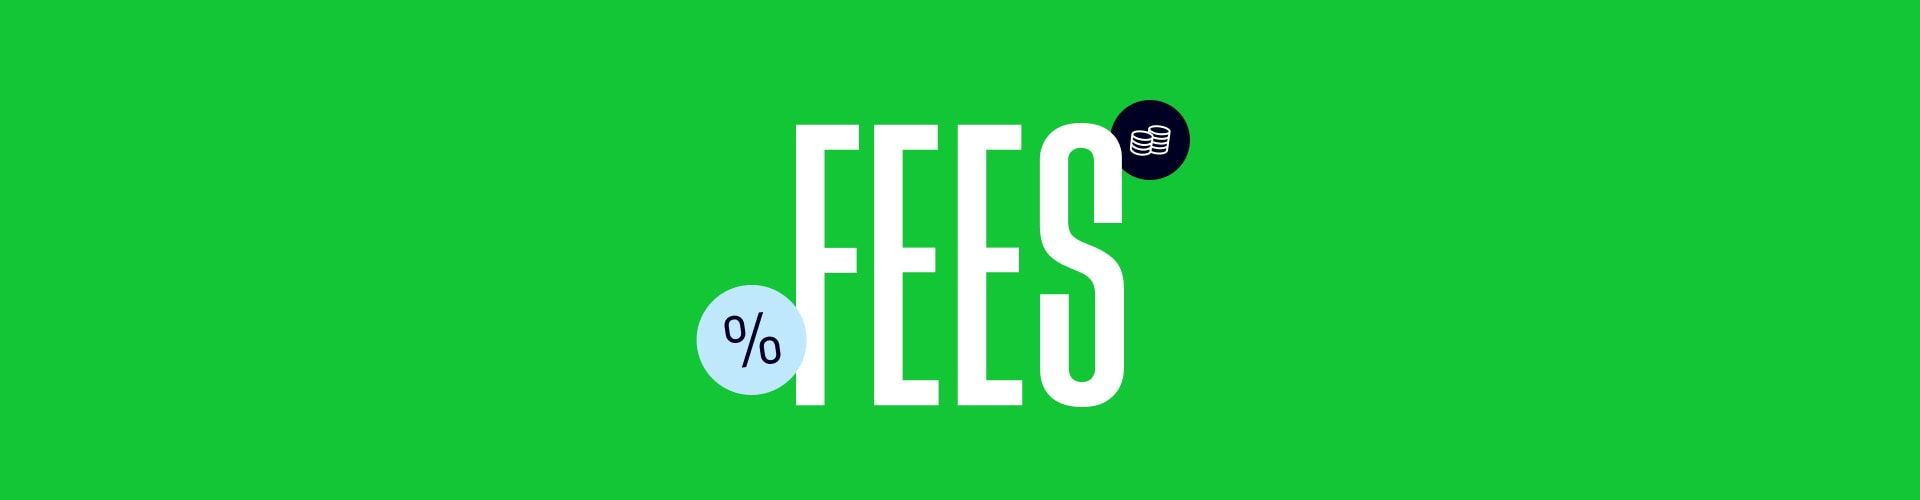 TBanque fees, explained as simply as possible